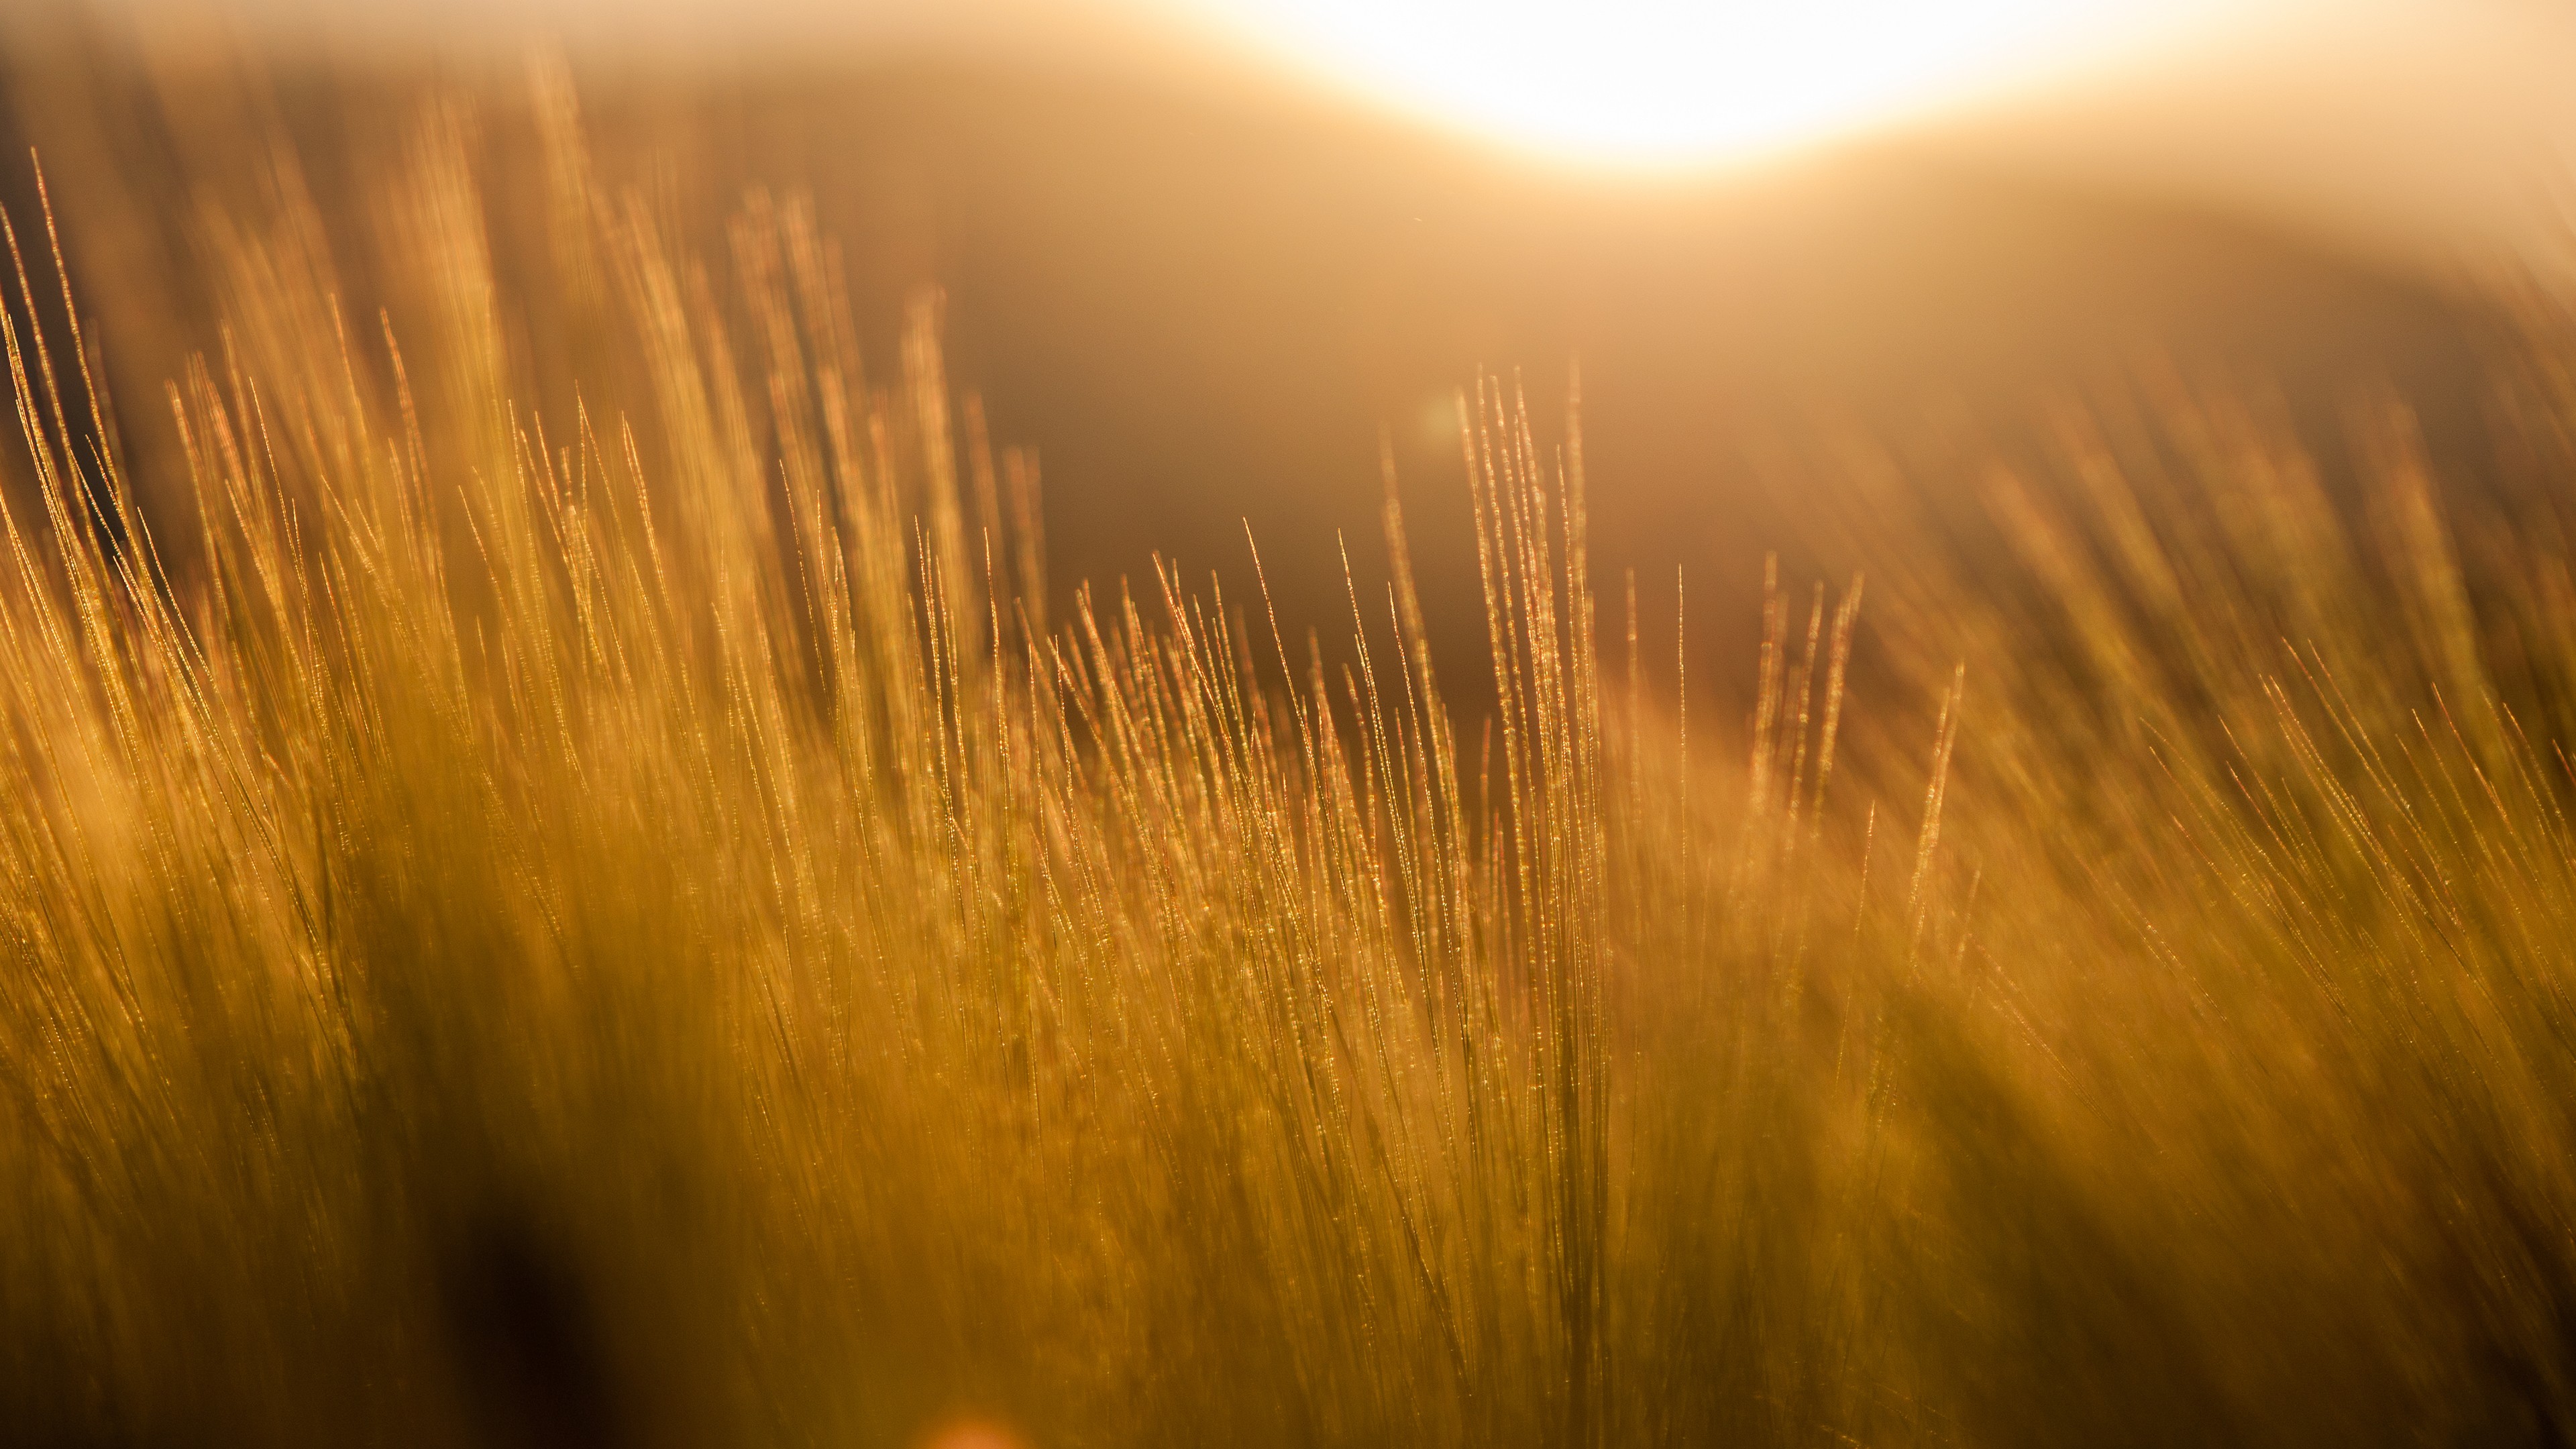 General 3840x2160 nature filter photography field sun rays barley yellow orange lights plants outdoors